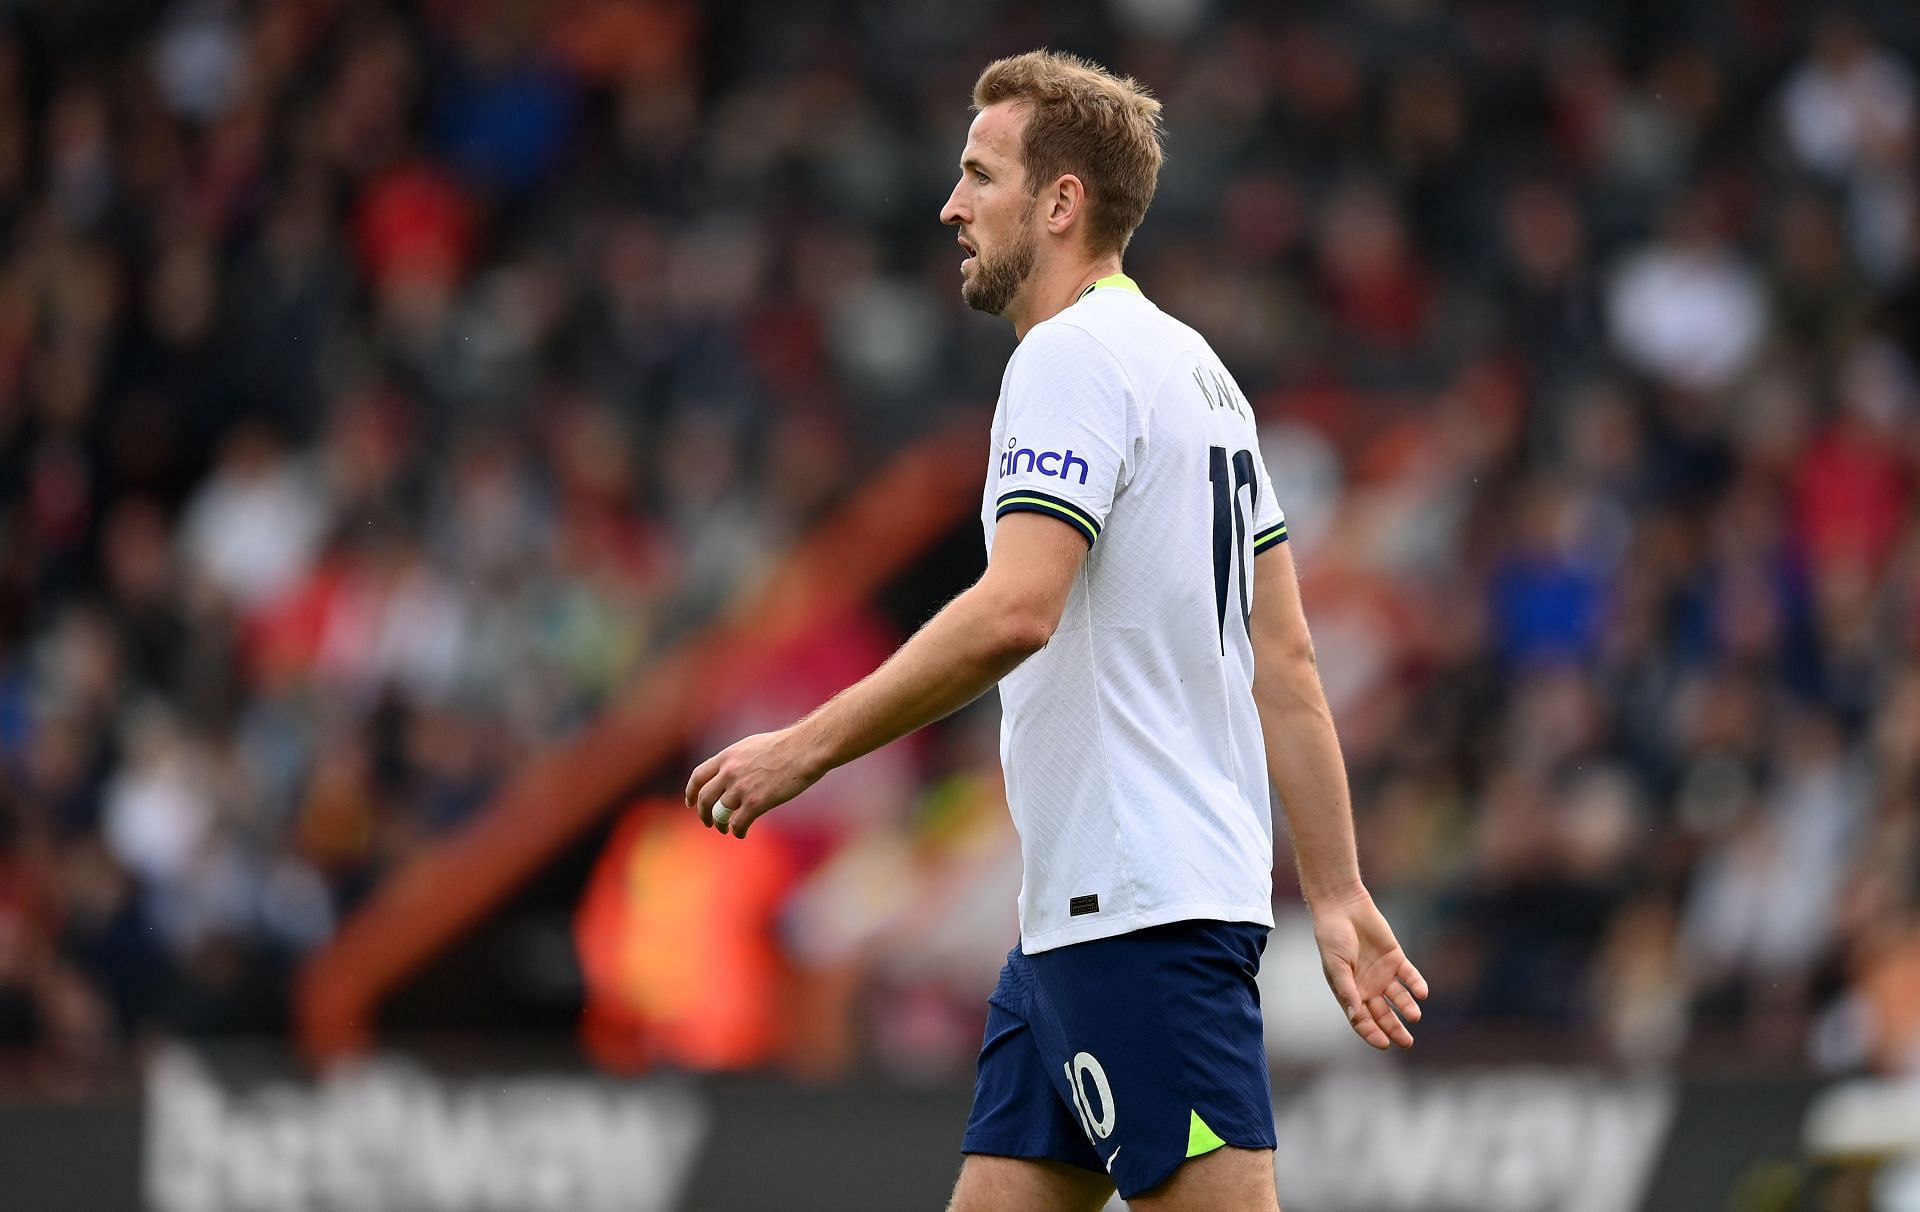 Harry Kane cut a frustrating figure in the Arsenal loss.